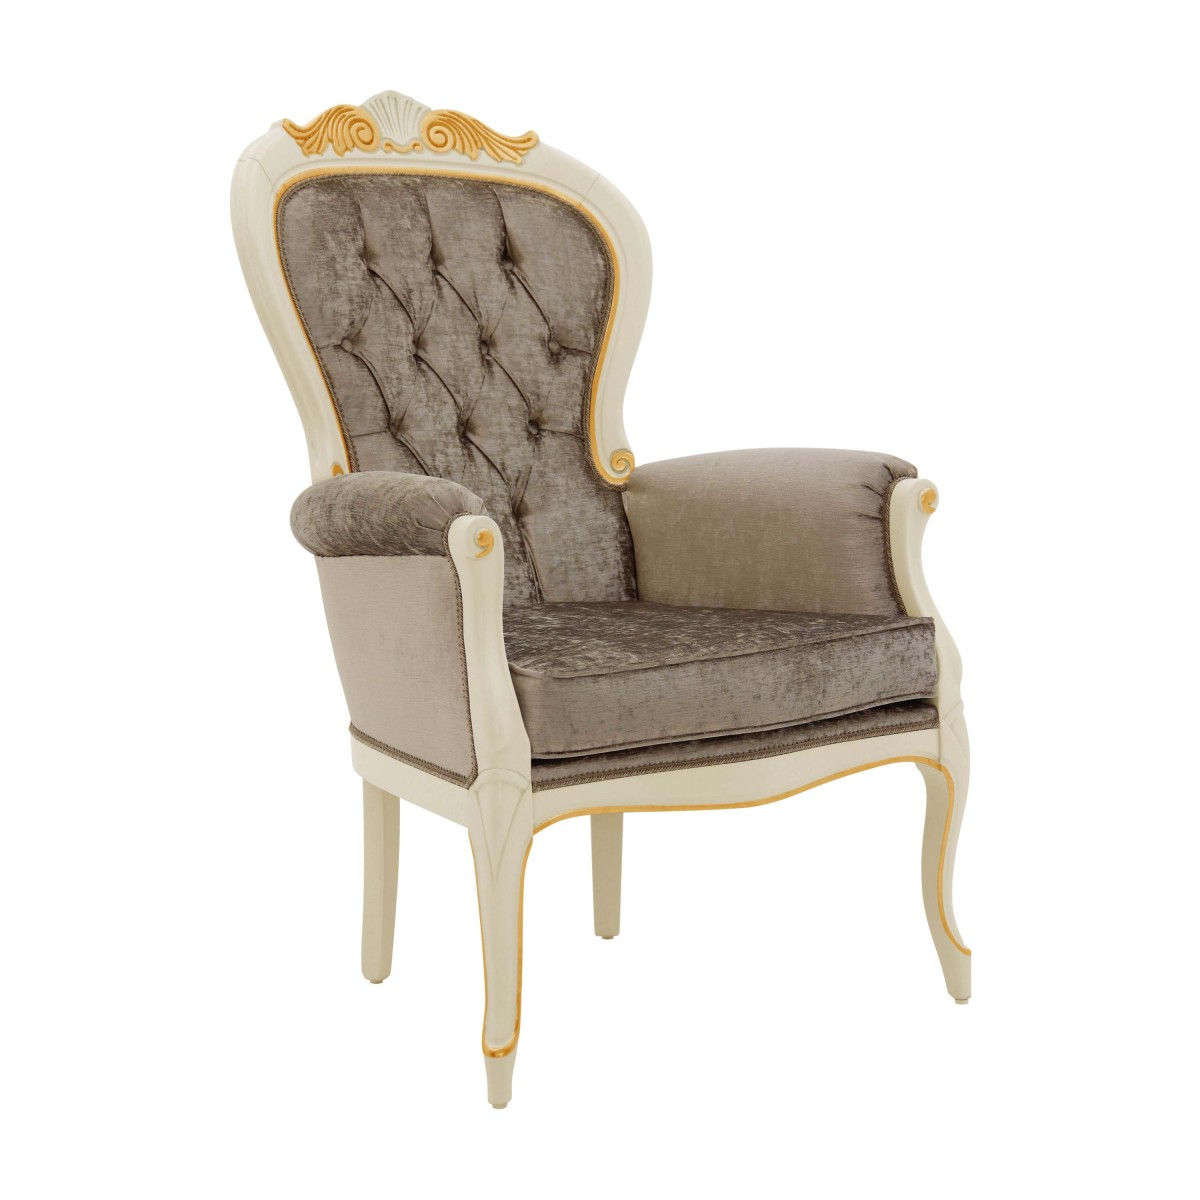 classic style wooden armchair